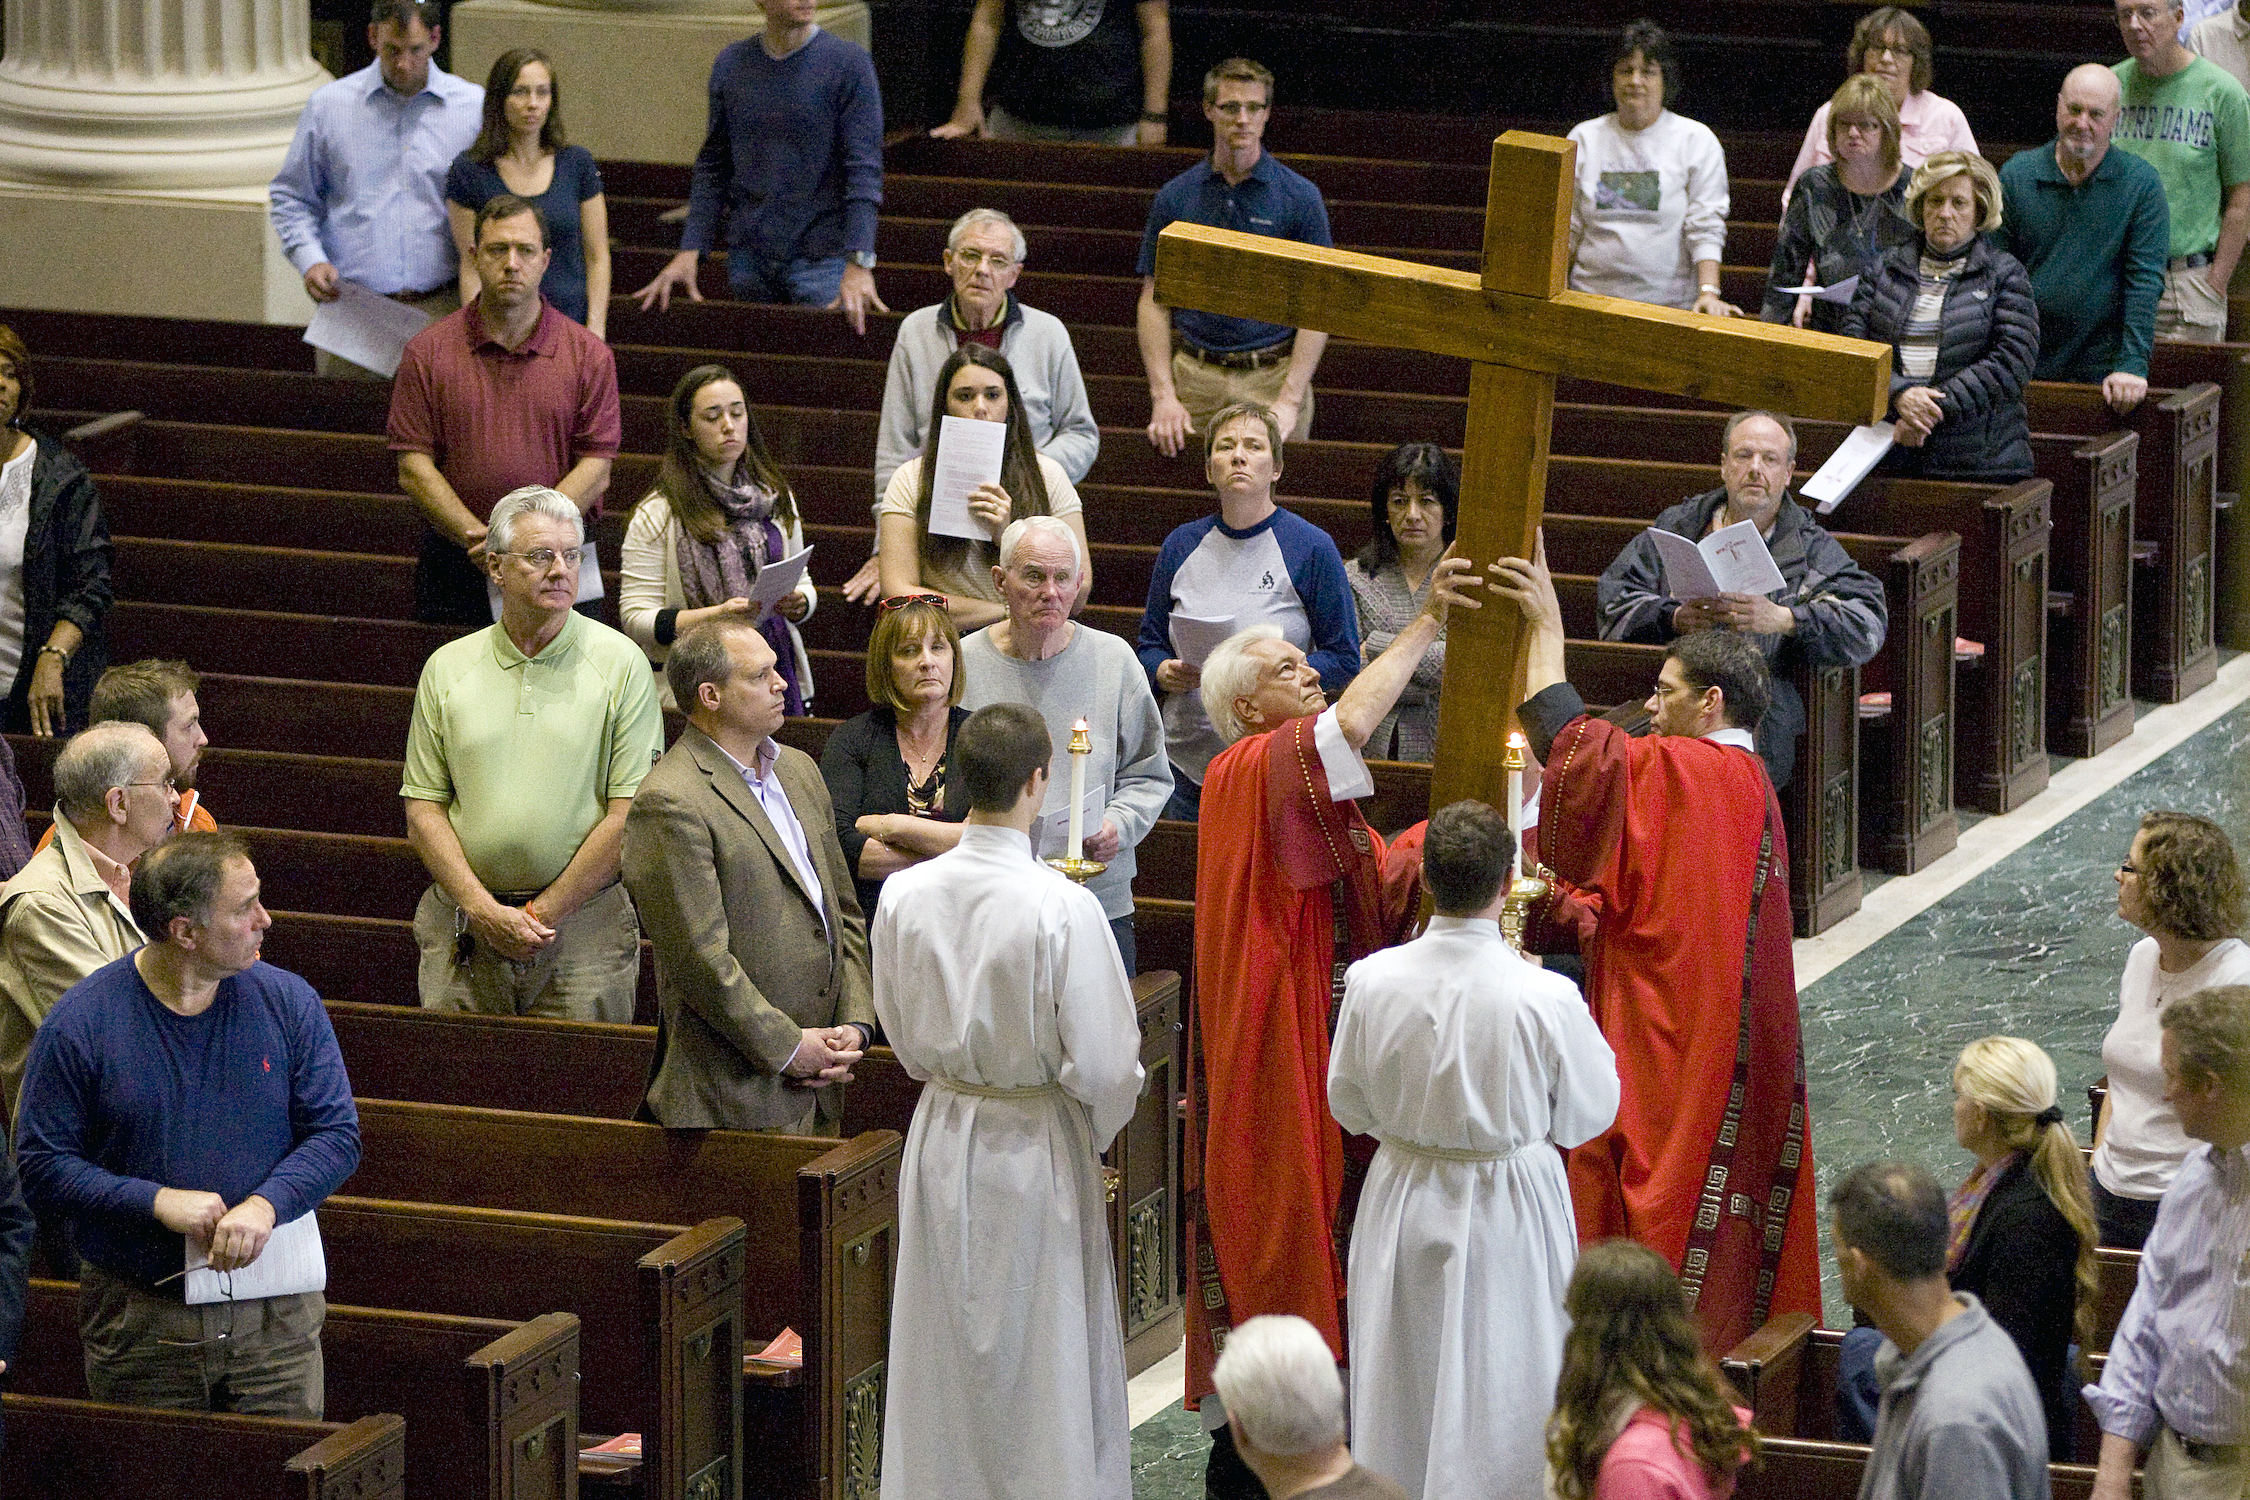 Showing of the Cross during Good Friday service. Photo by Colleen Kelley